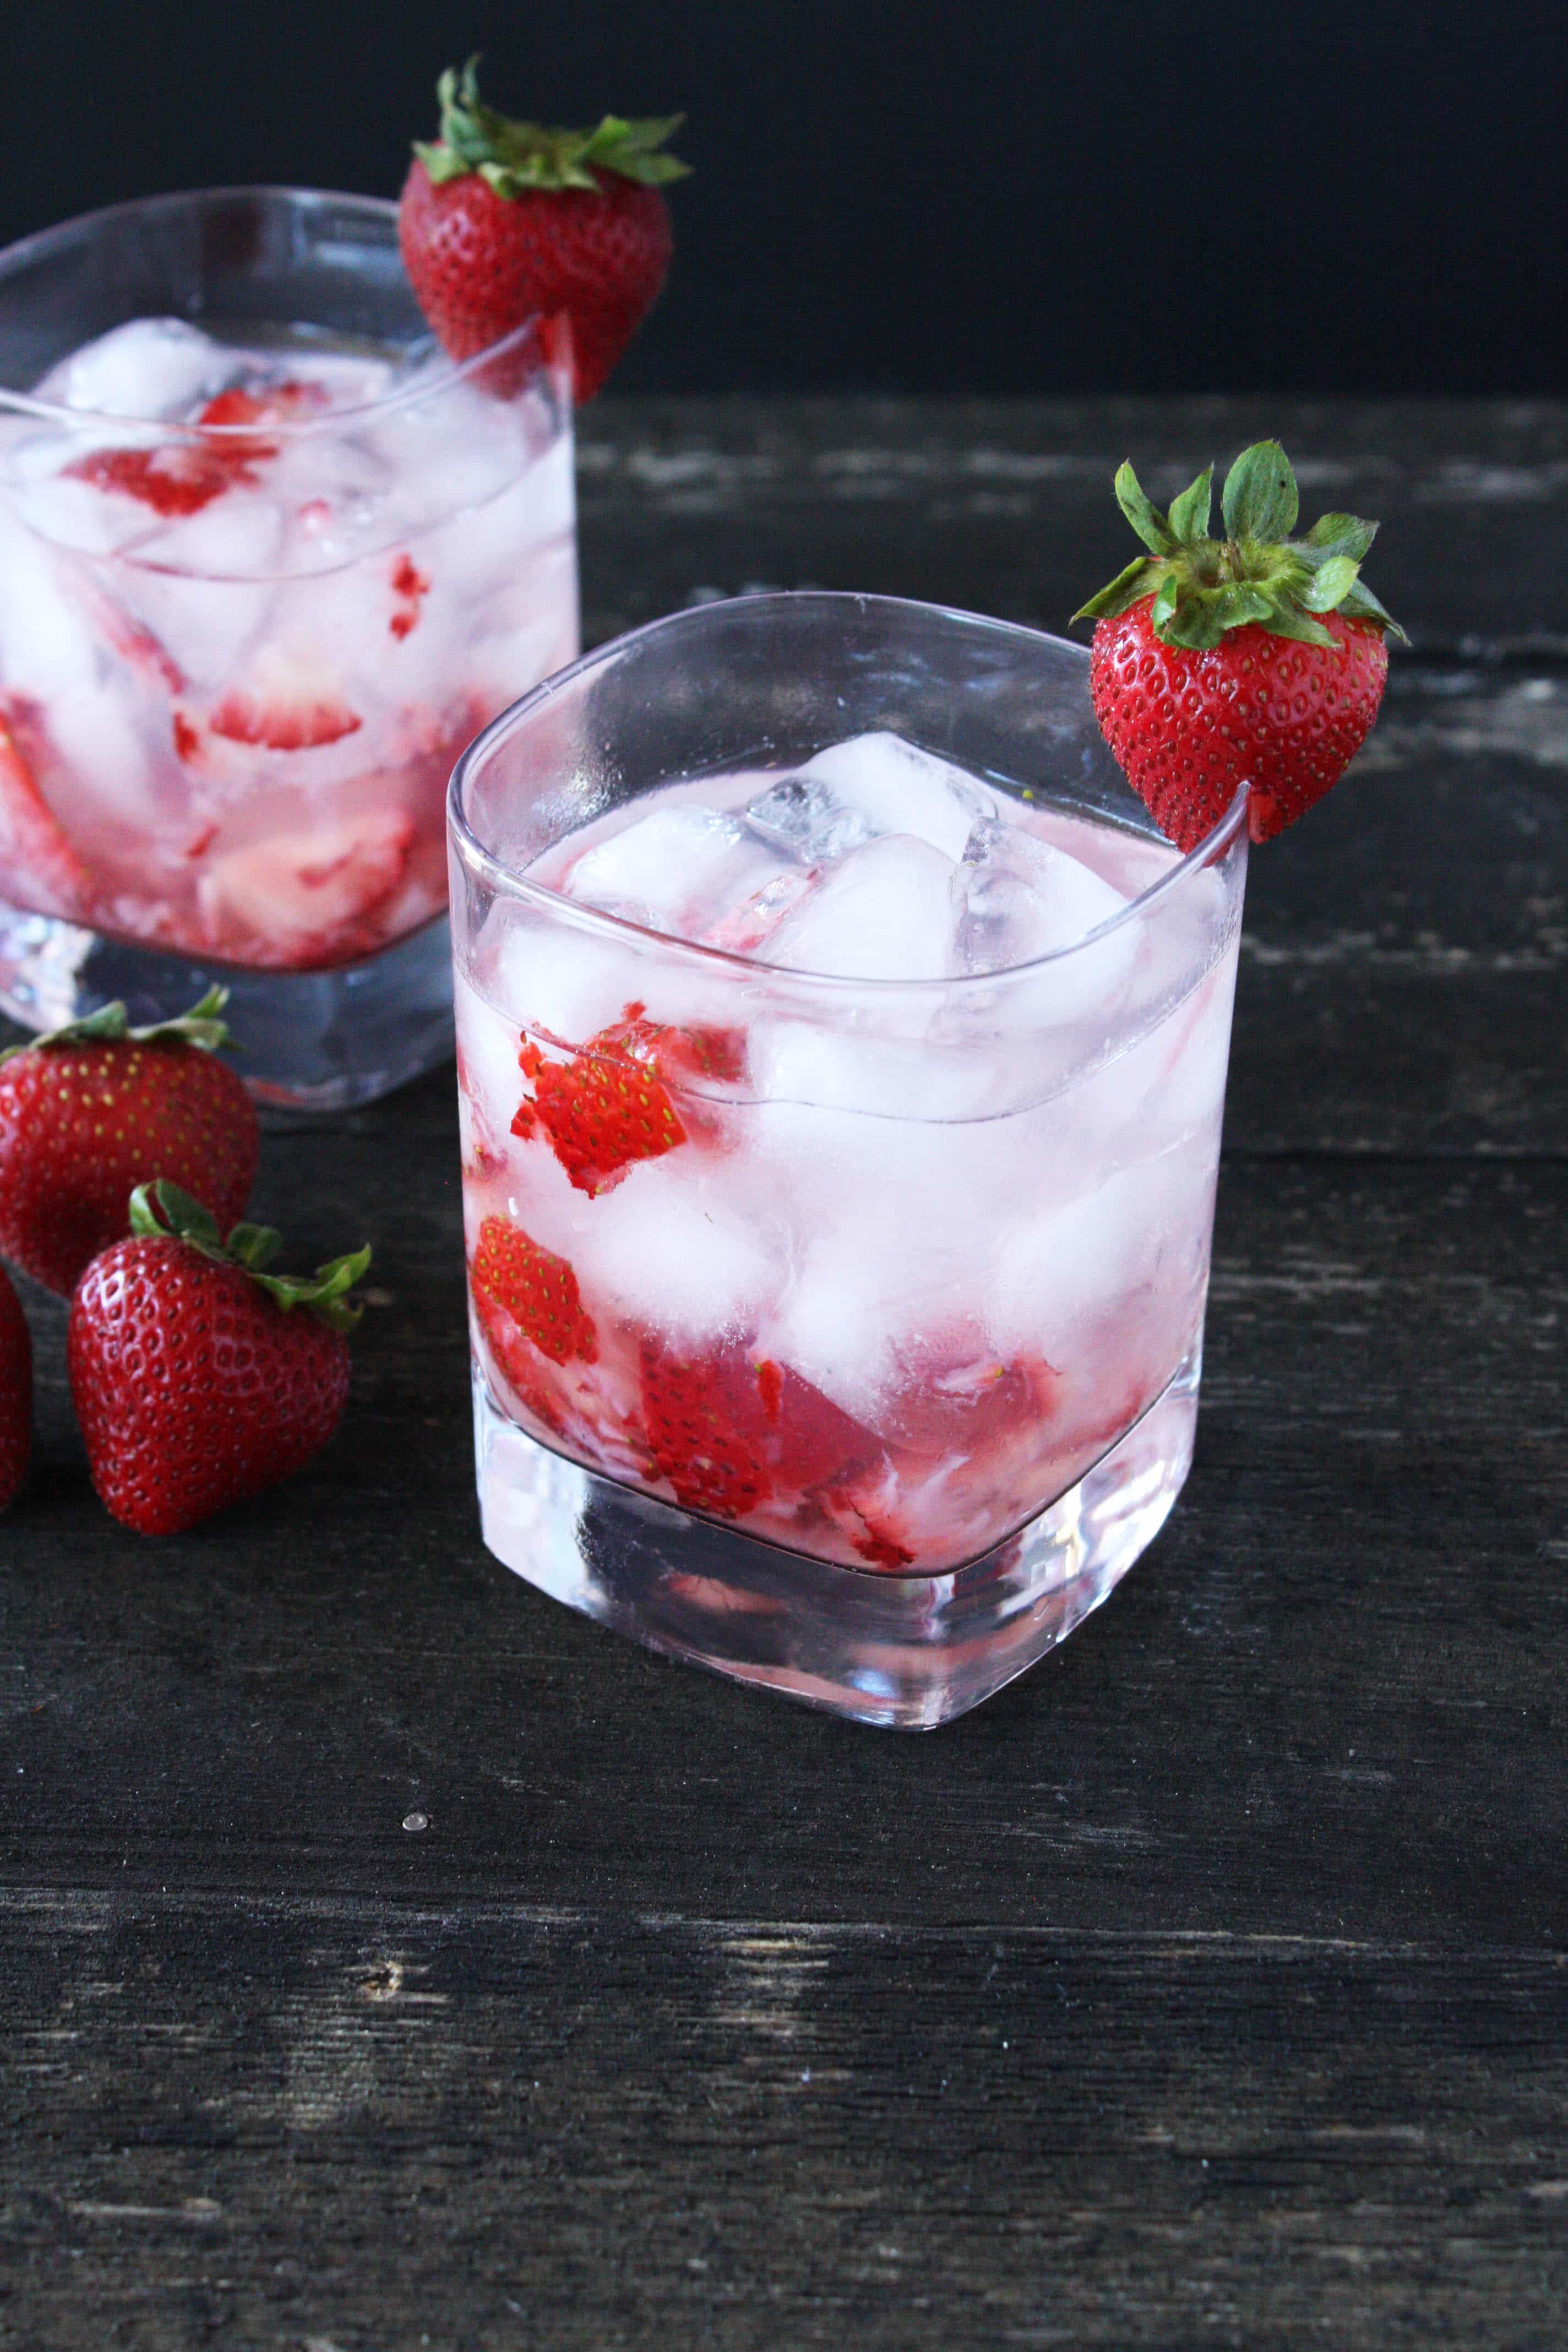 Now you've got pretty pink colored strawberry infused vodka! 